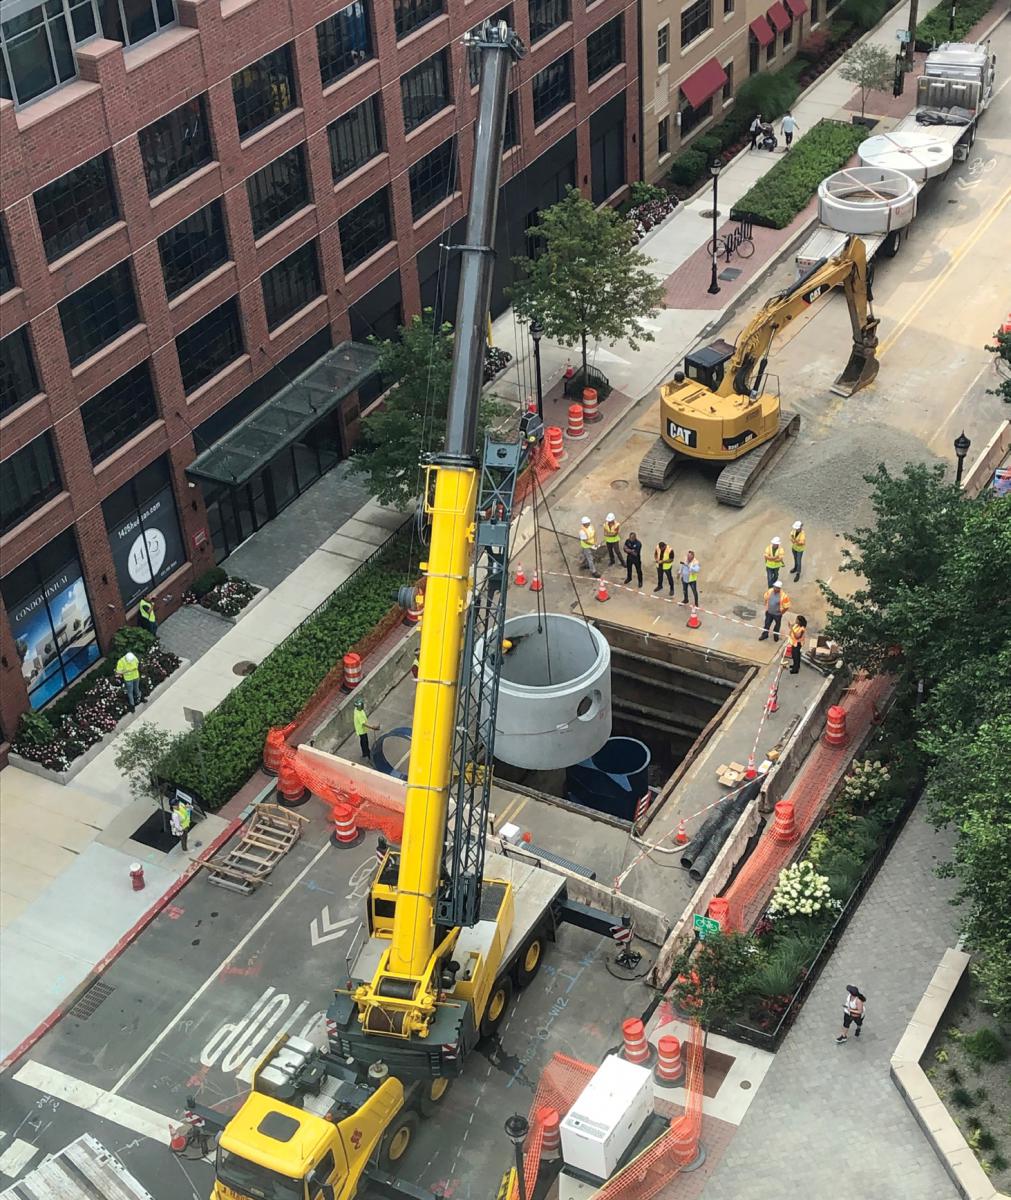 Photo of a crane lowering stormwater equipment into a hole in the middle of a street with multistory buildings on one side.